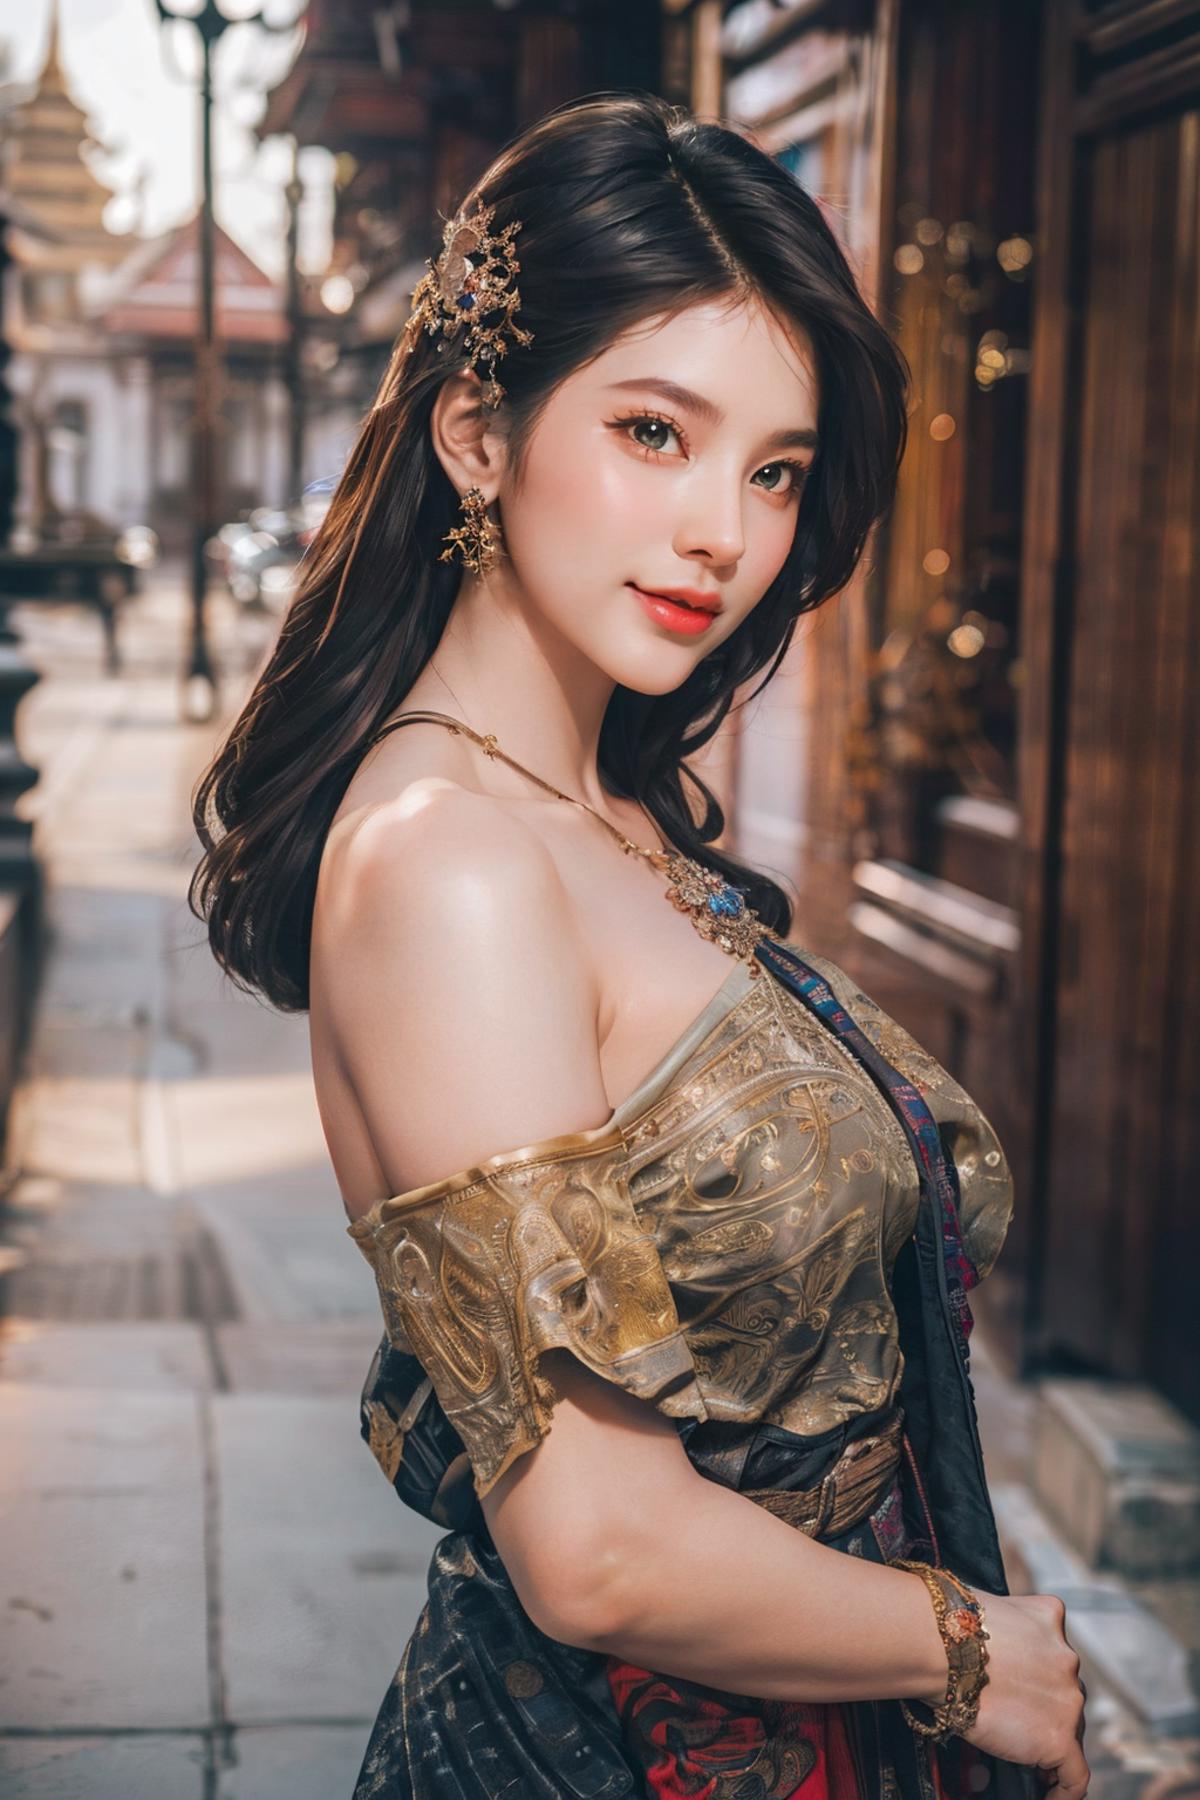 Thailand Tradition Dress image by soulburn777